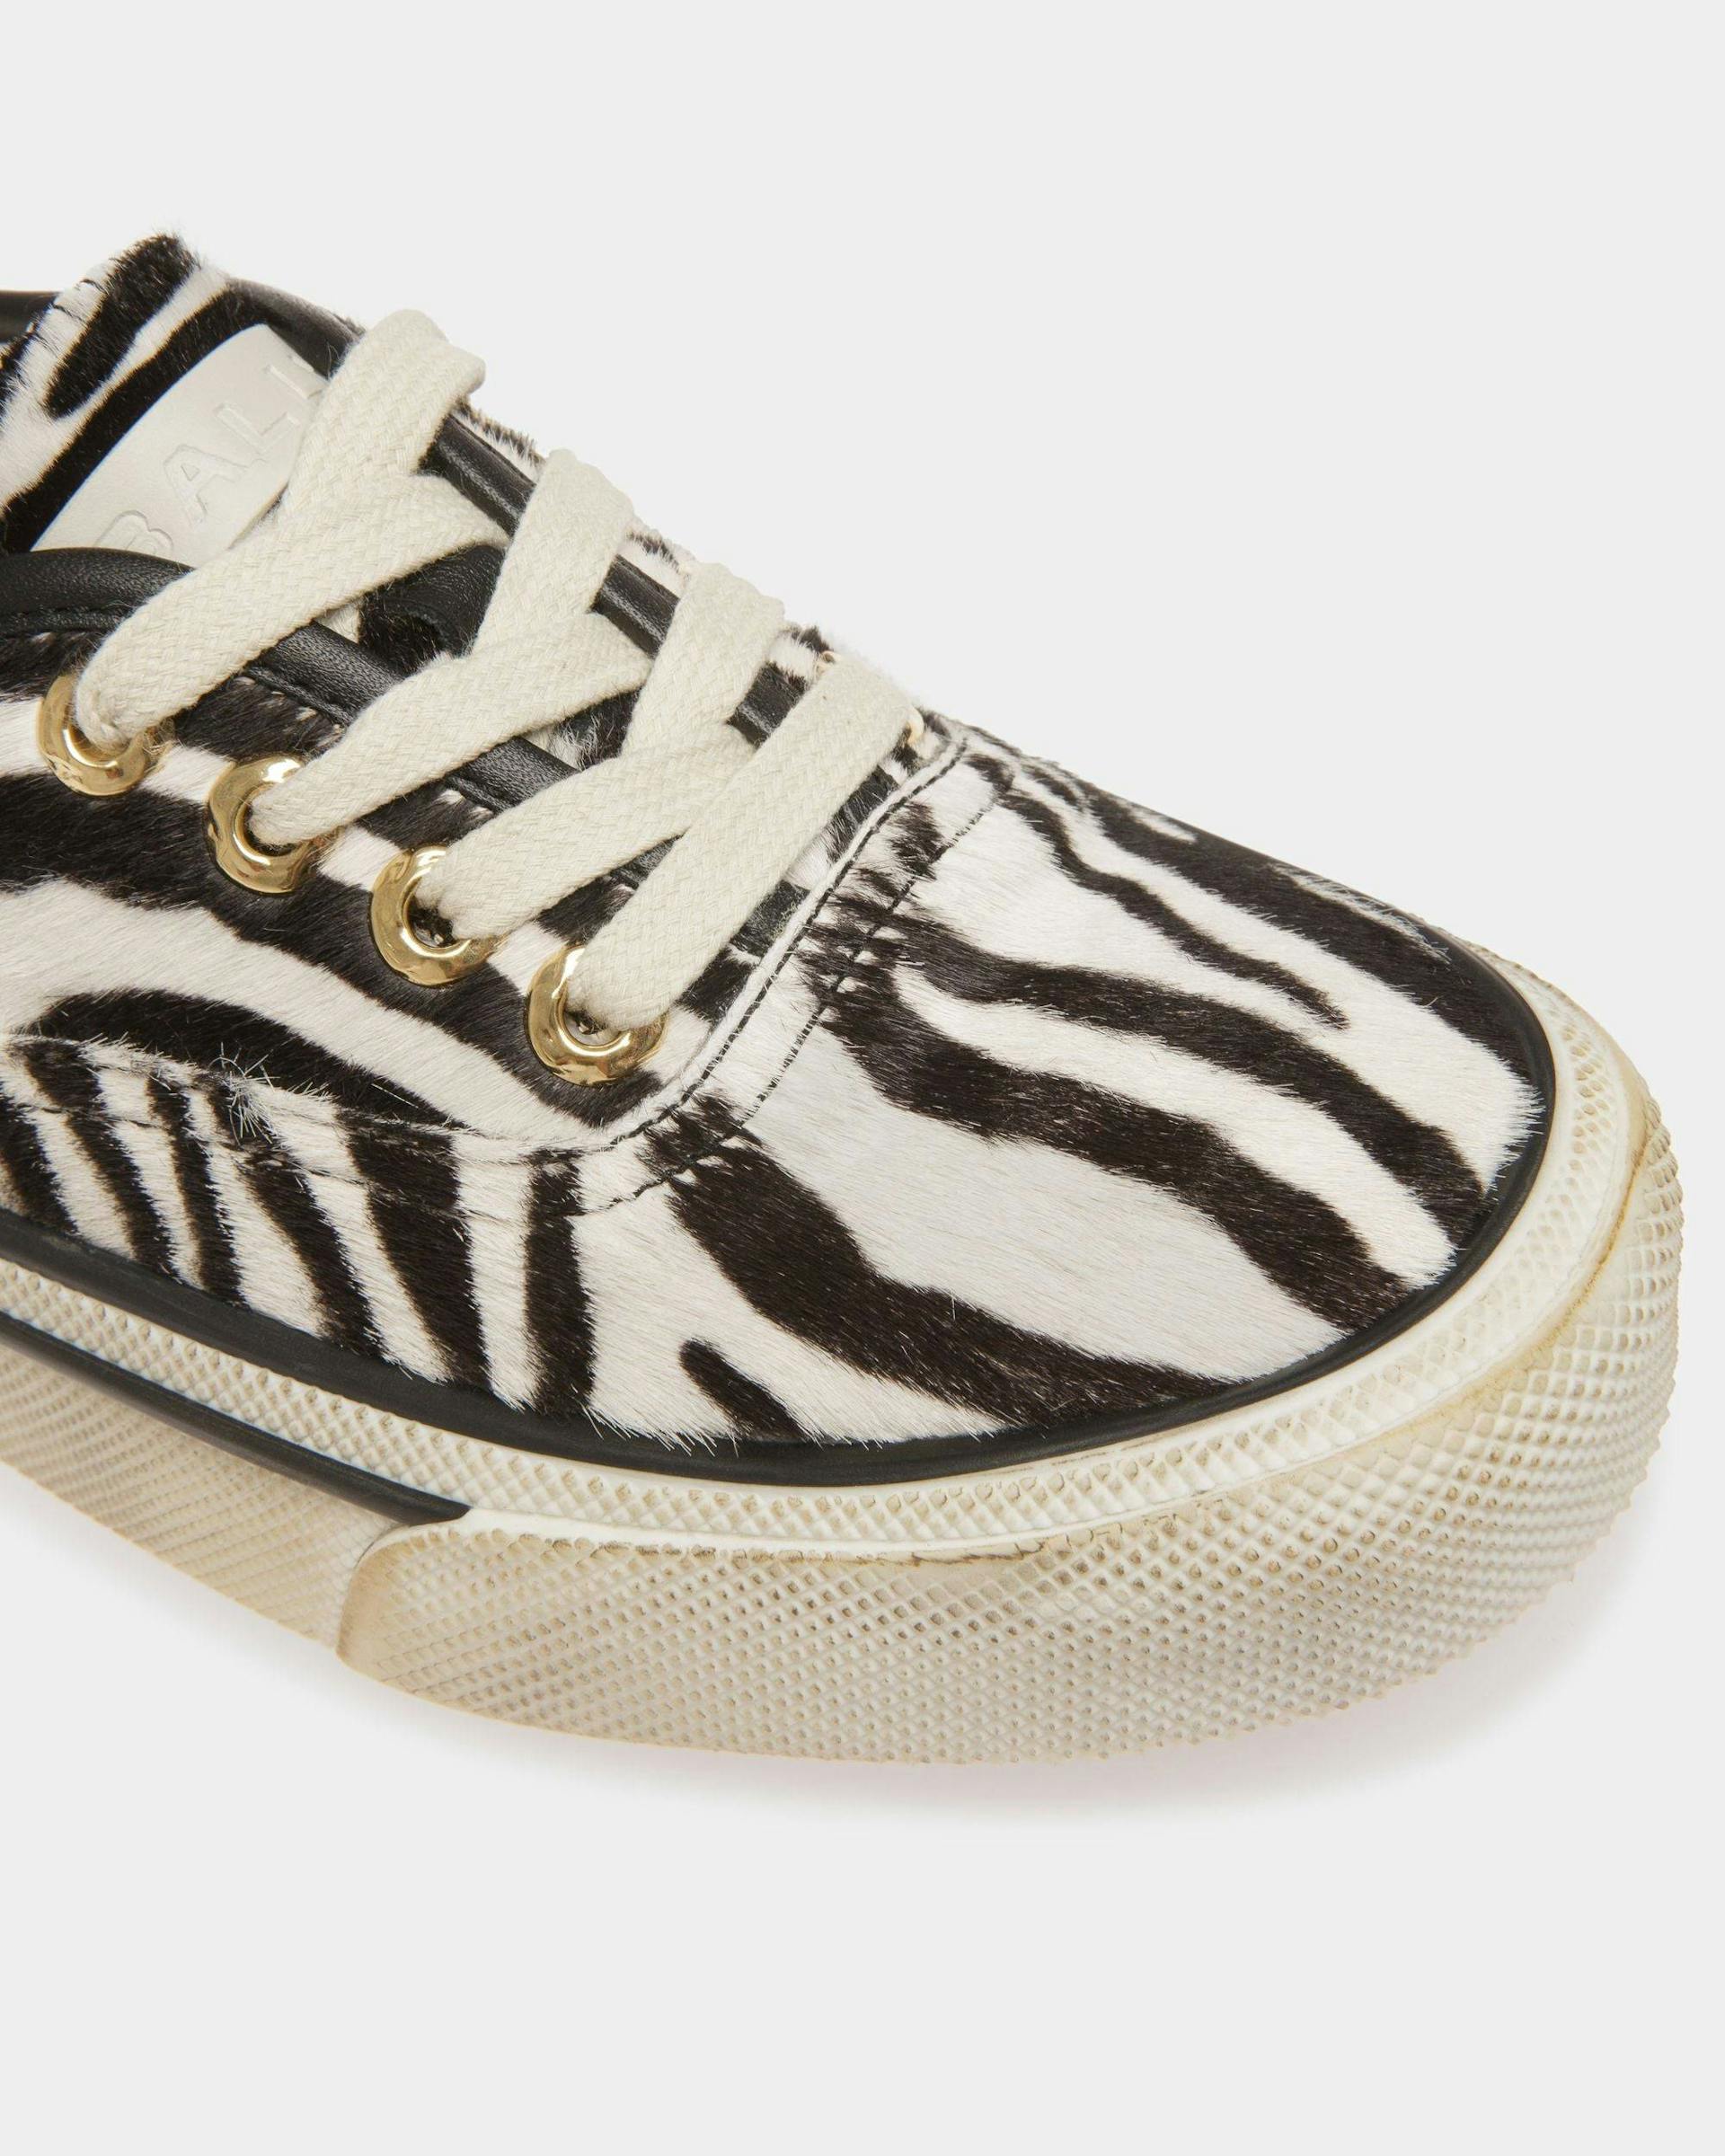 Santa Ana Sneakers In White And Black Haircalf Leather - Women's - Bally - 05